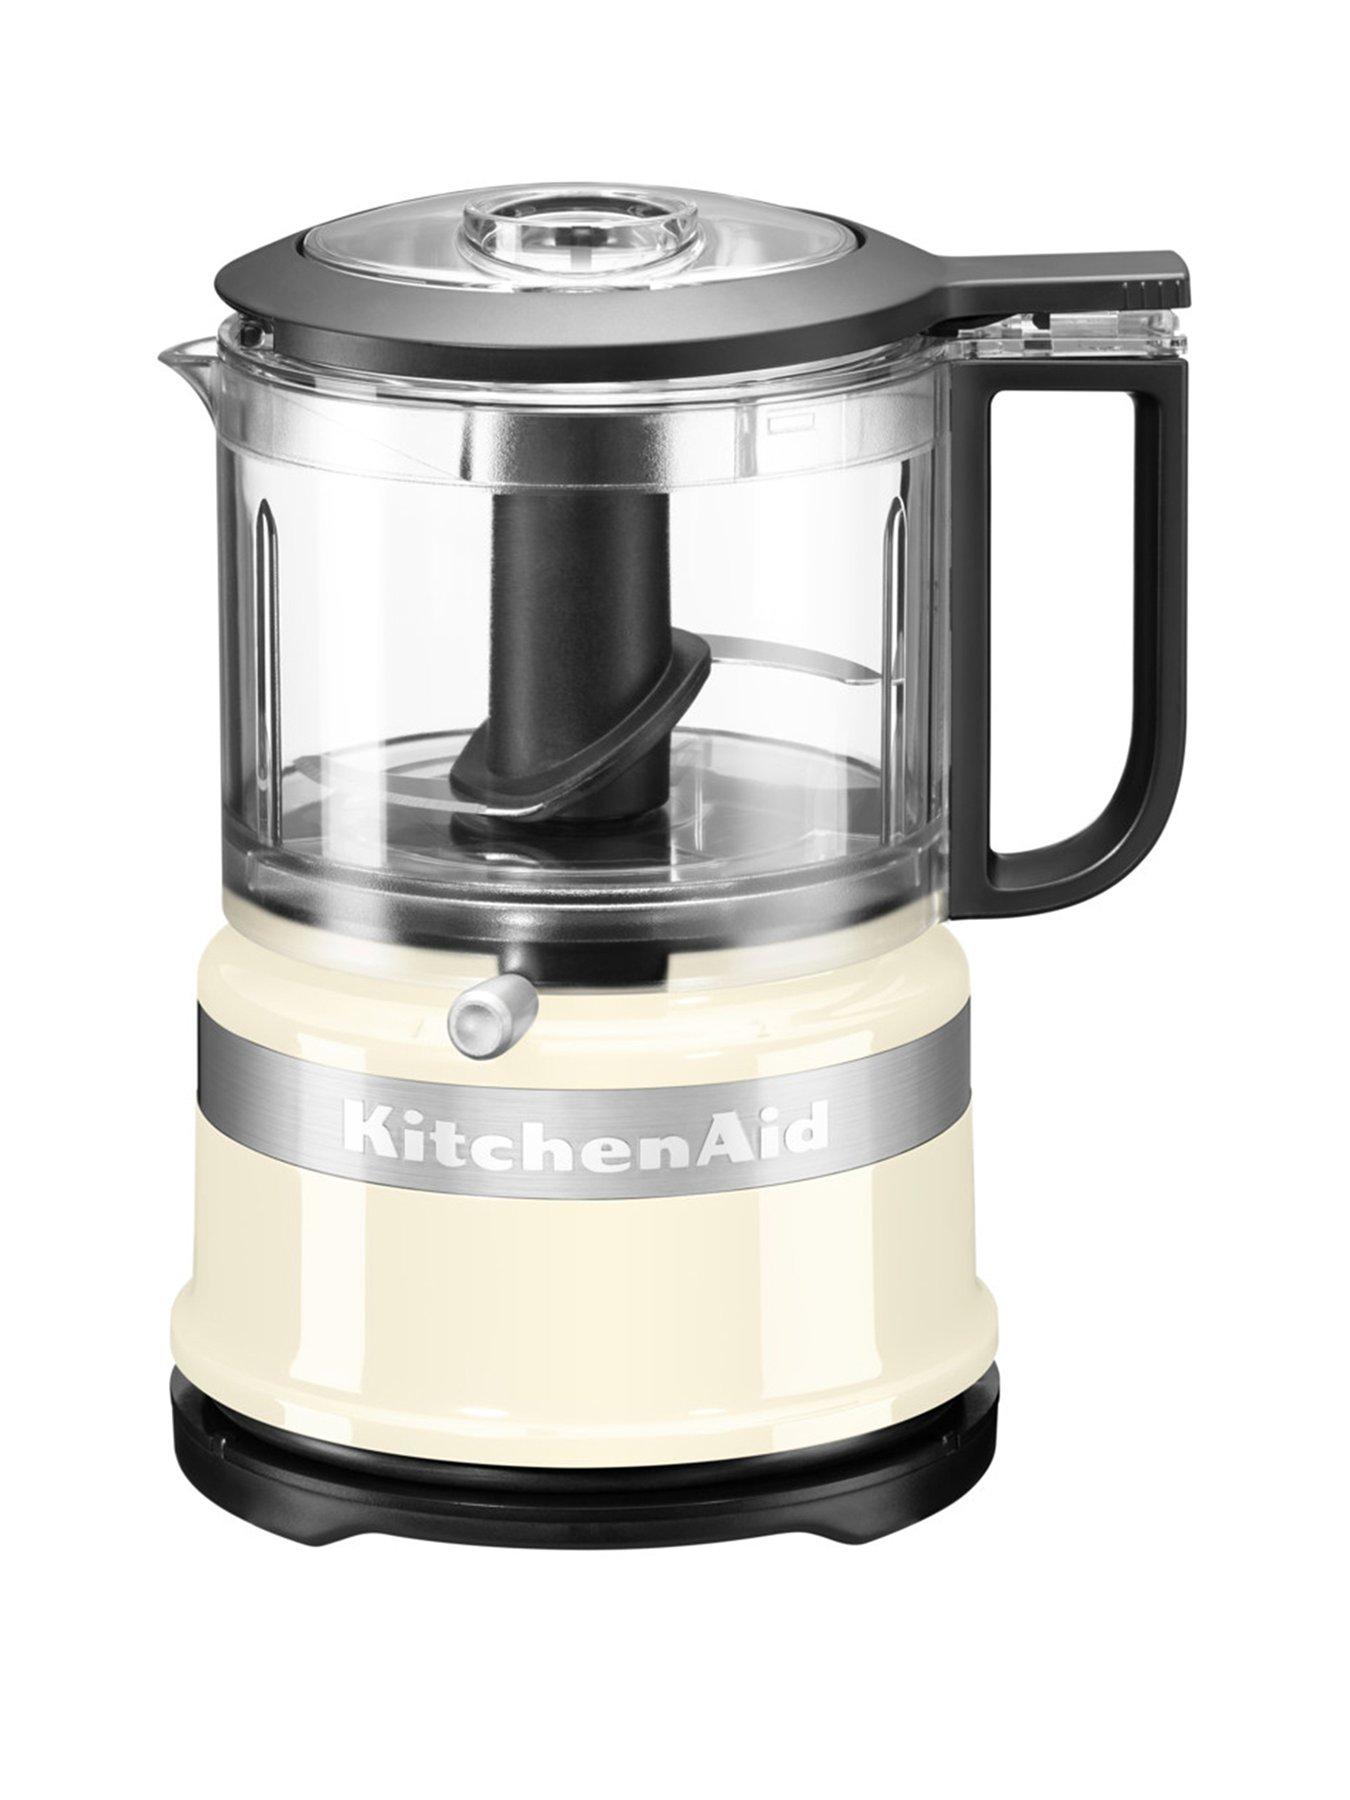 KitchenAid Tilt Head Stand Mixer + Pastry Beater Attachment - Beetroot, Reliable Warranty